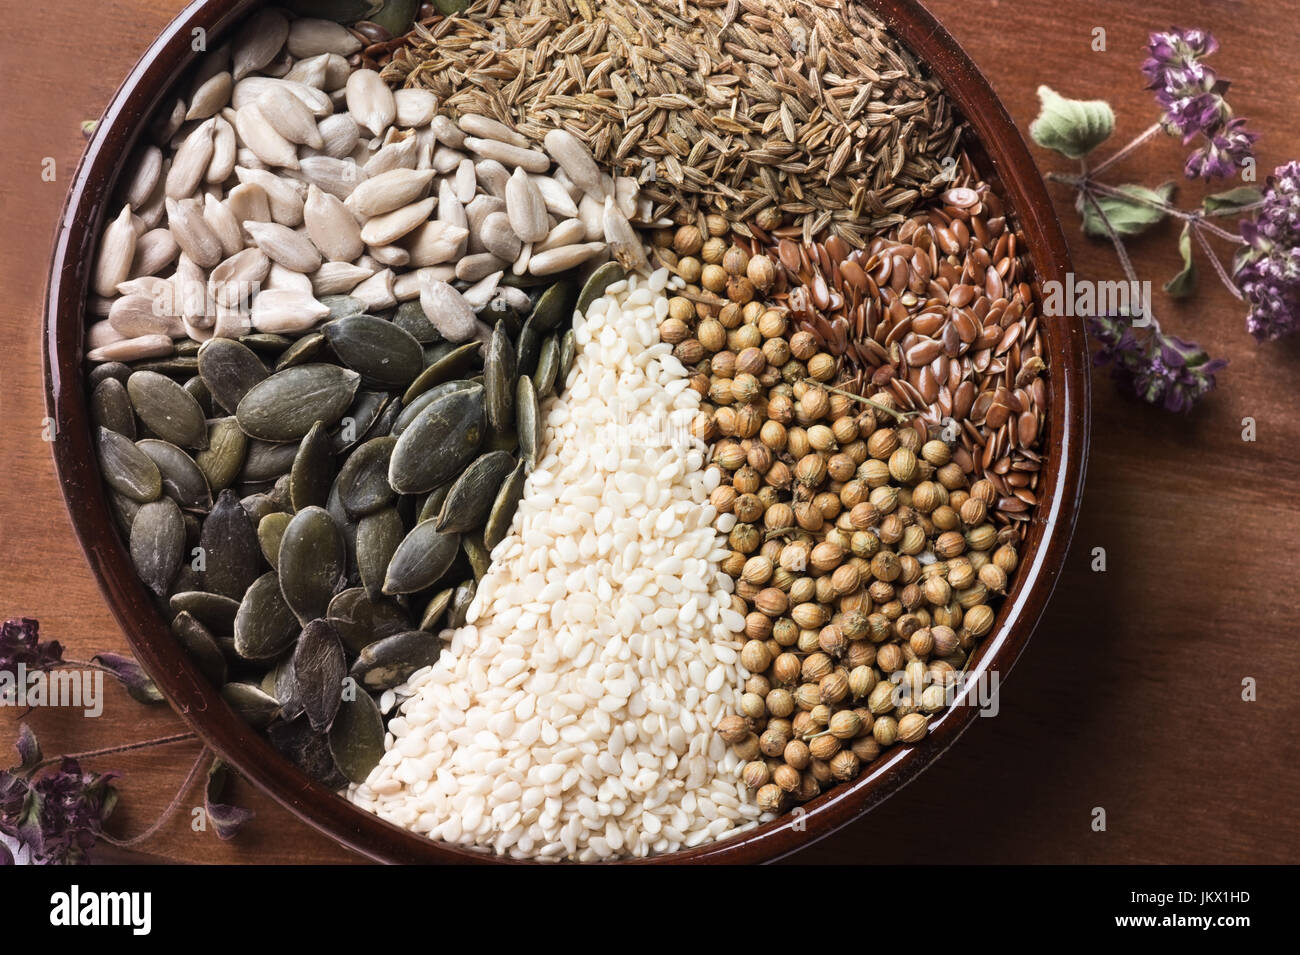 Spices and herbs in ceramic bowl. seasoning. Colorful natural additives. Stock Photo